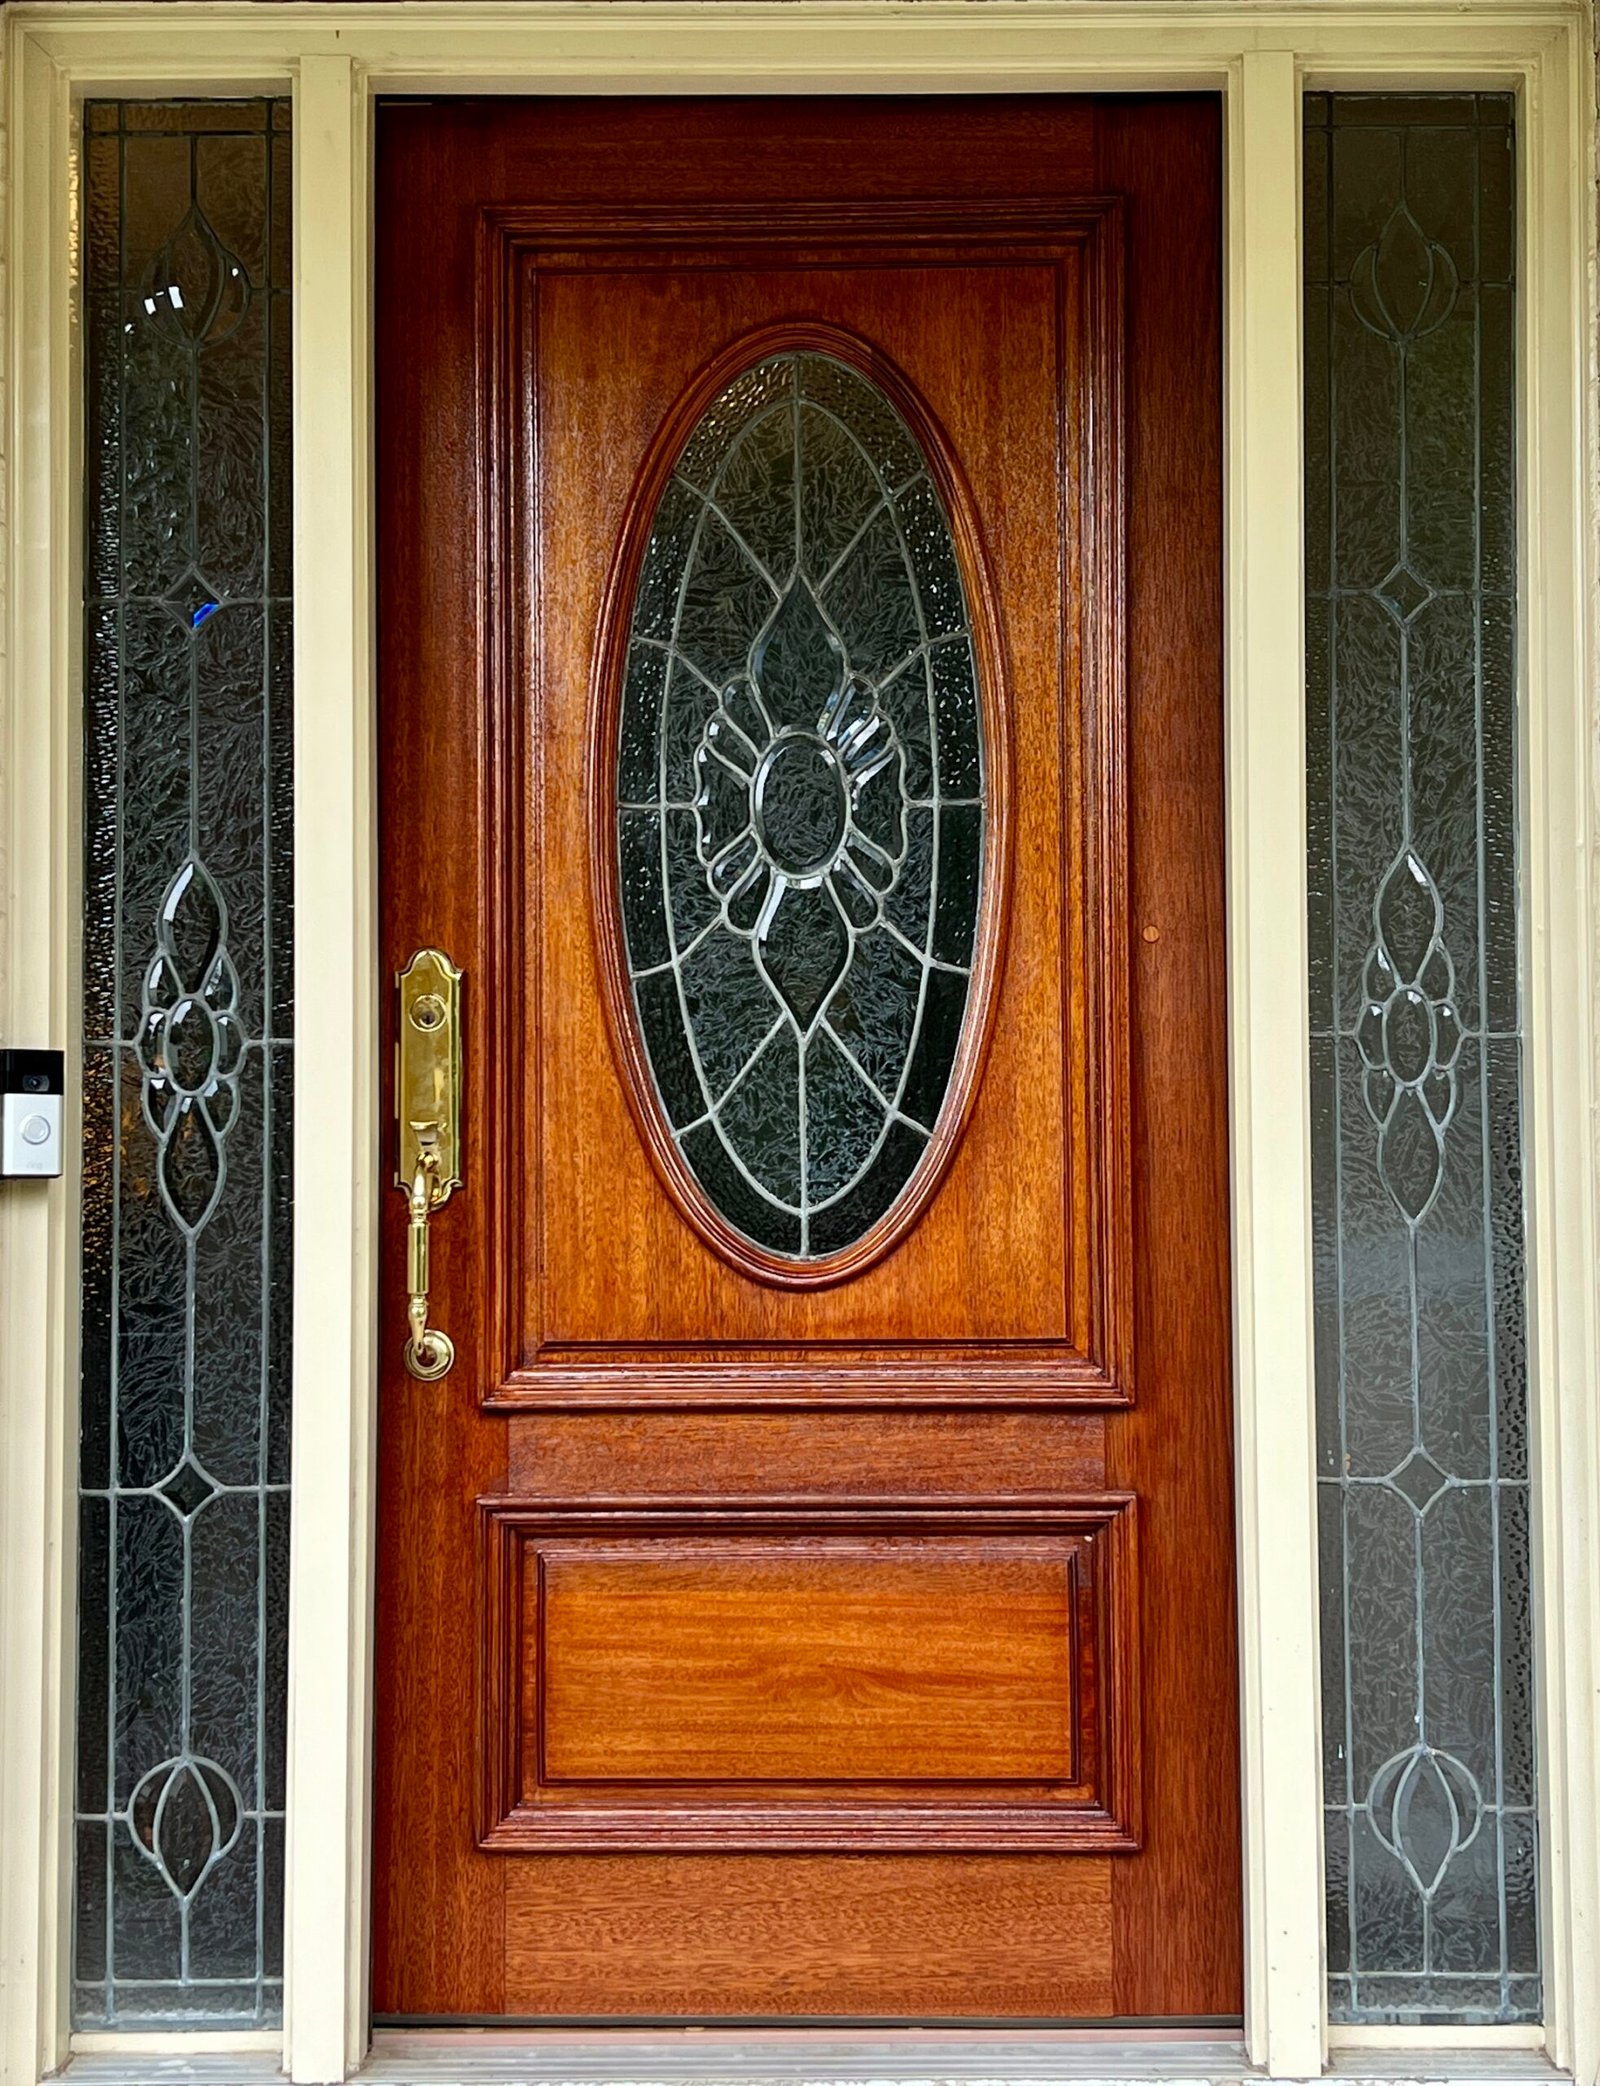 Refinished wooden door with a revitalized appearance